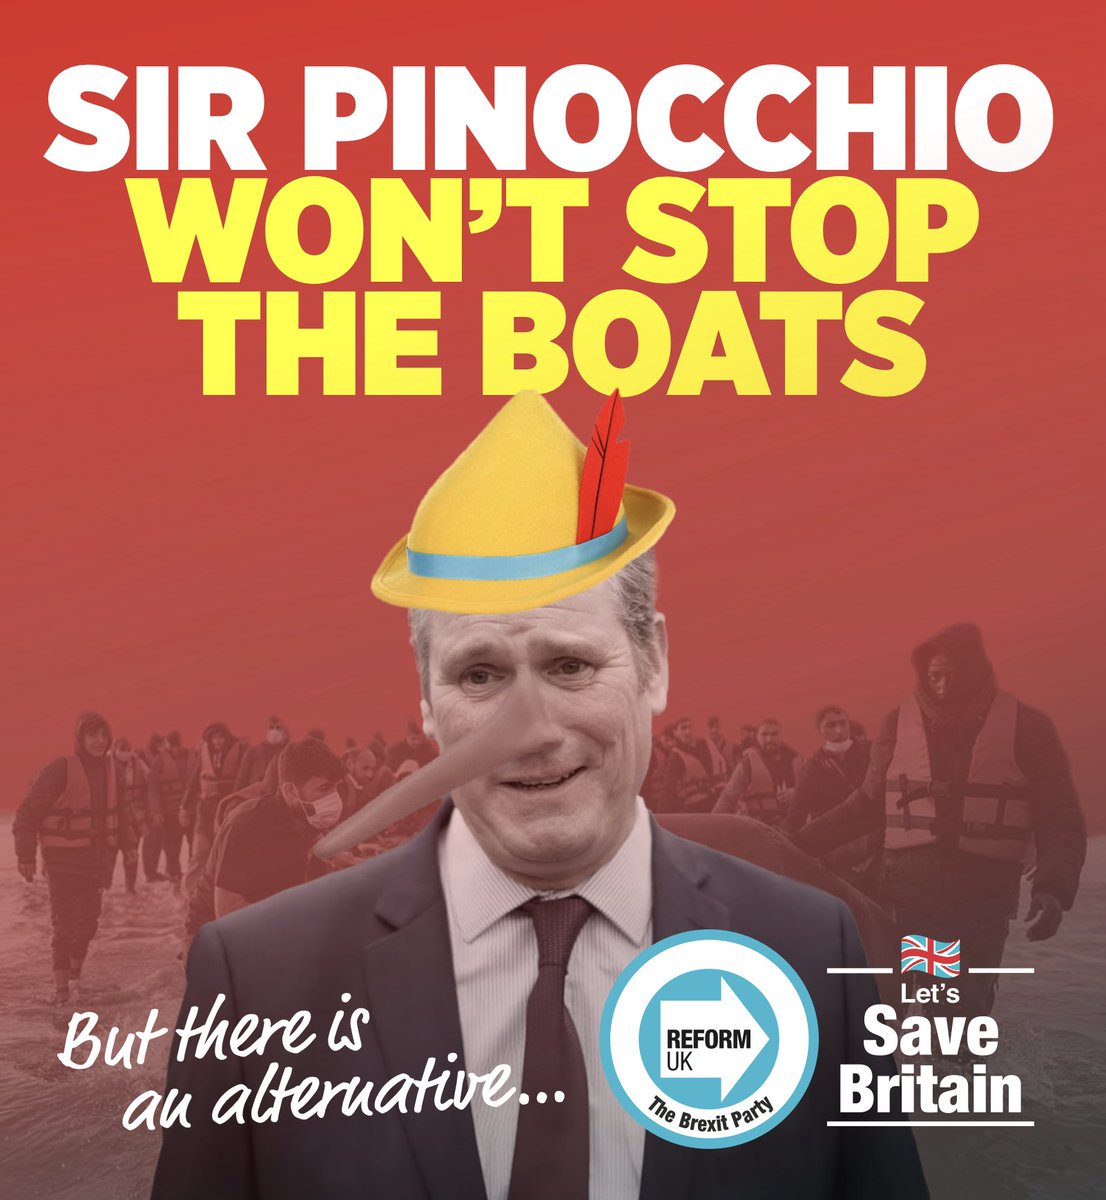 It is clear: Only Reform UK will stop the boats…